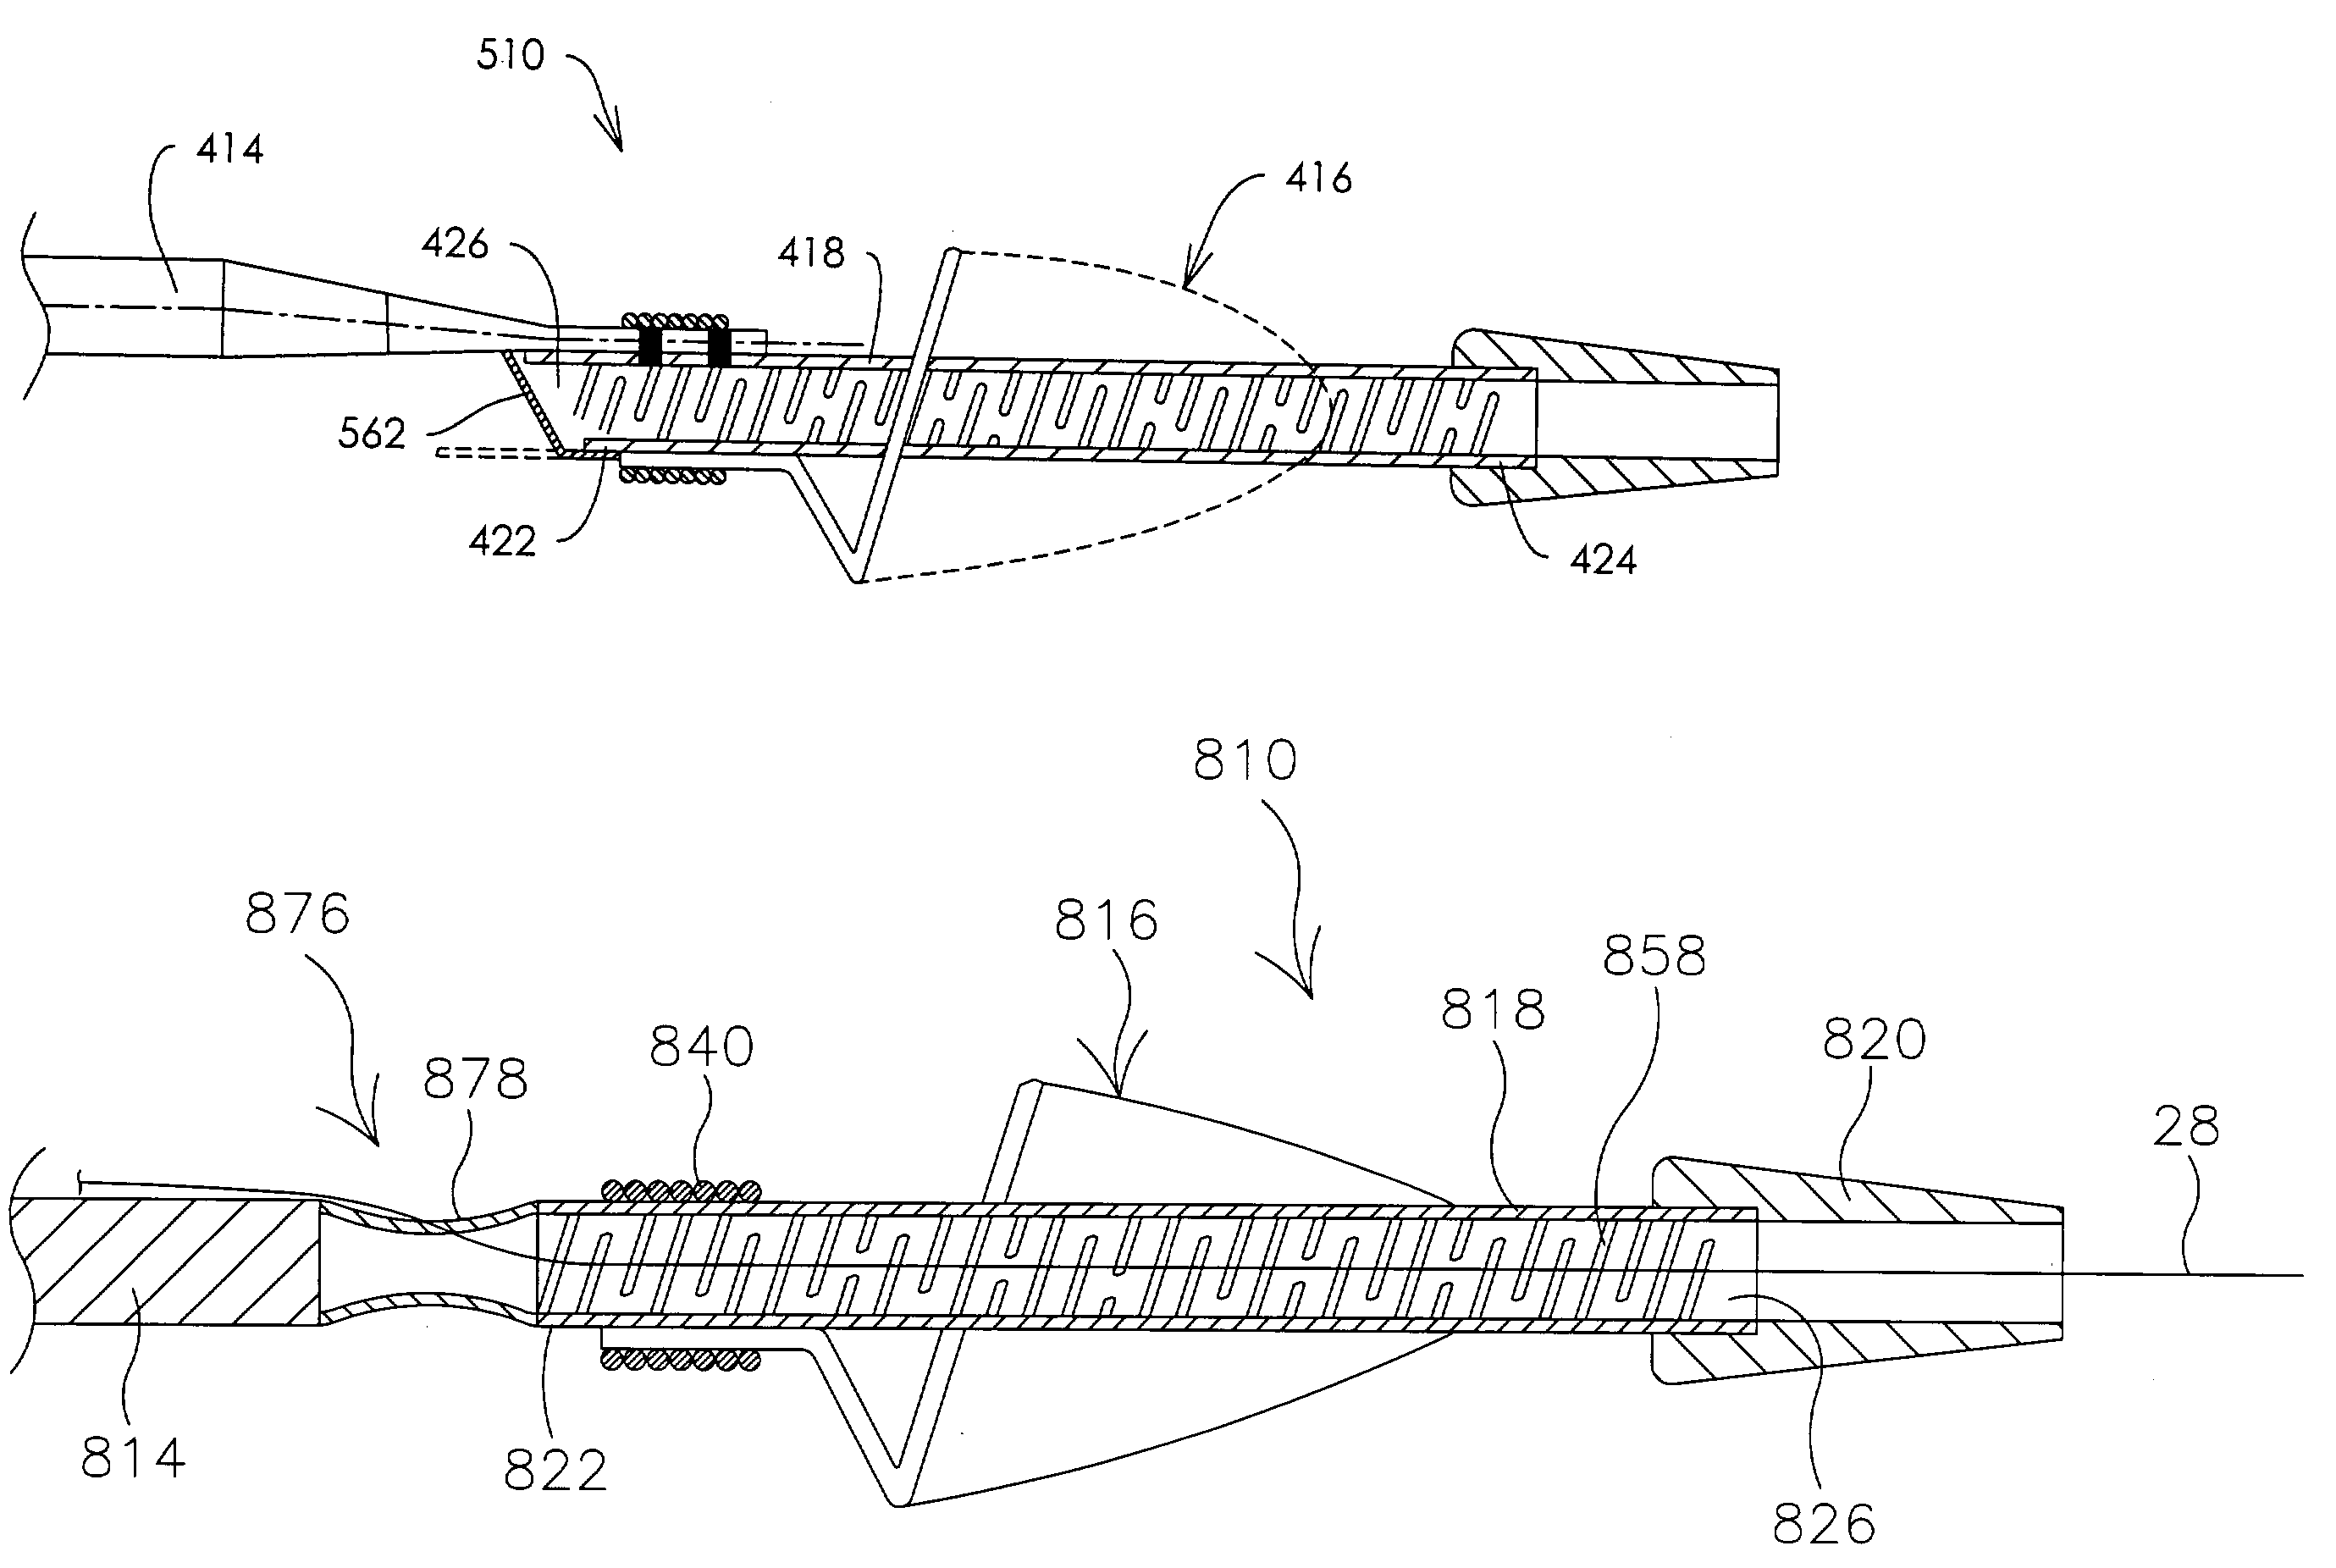 Embolic protection filtering device that can be adapted to be advanced over a guidewire